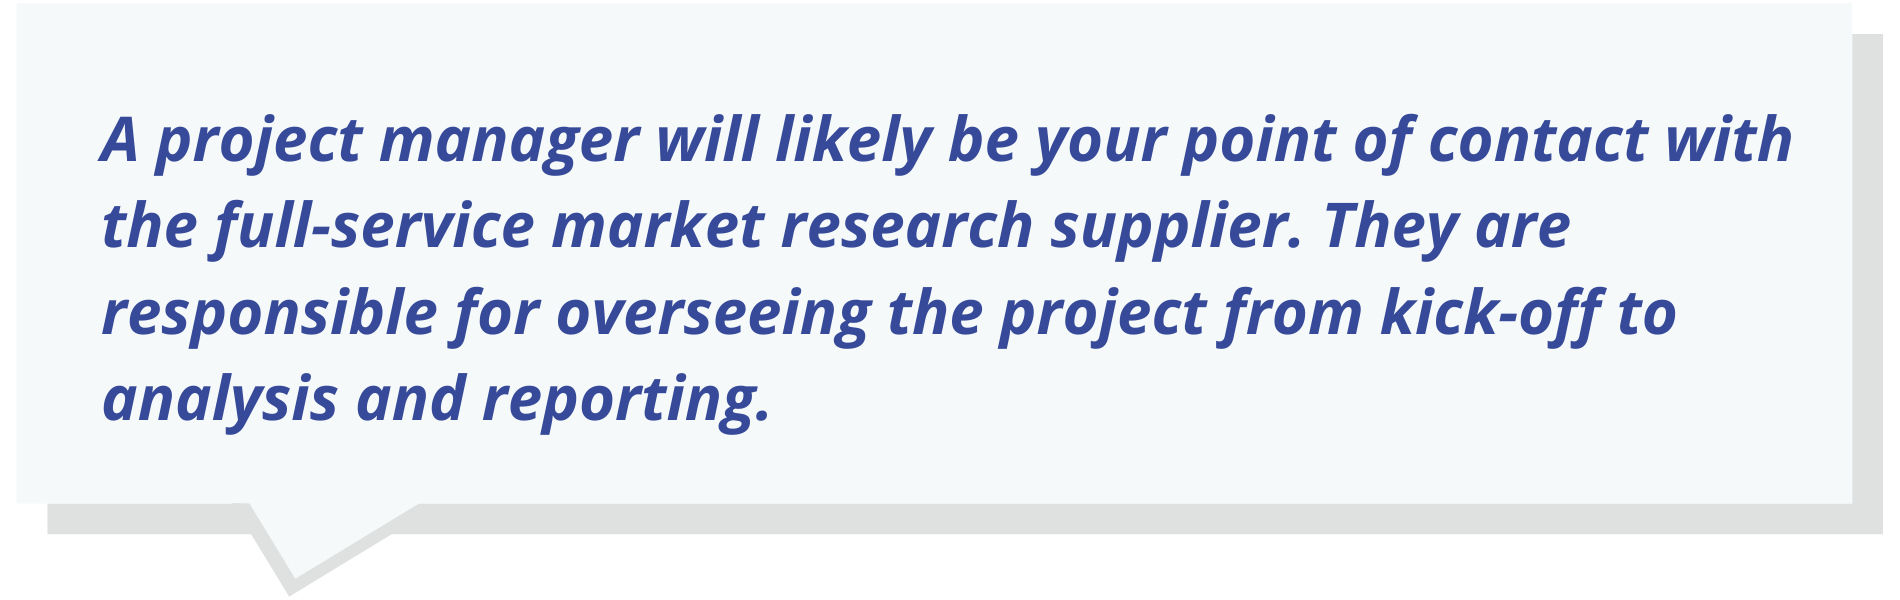 A project manager will likely be your point of contact with the full-service market research supplier. They are responsible for overseeing the project from kick-off to analysis and reporting.